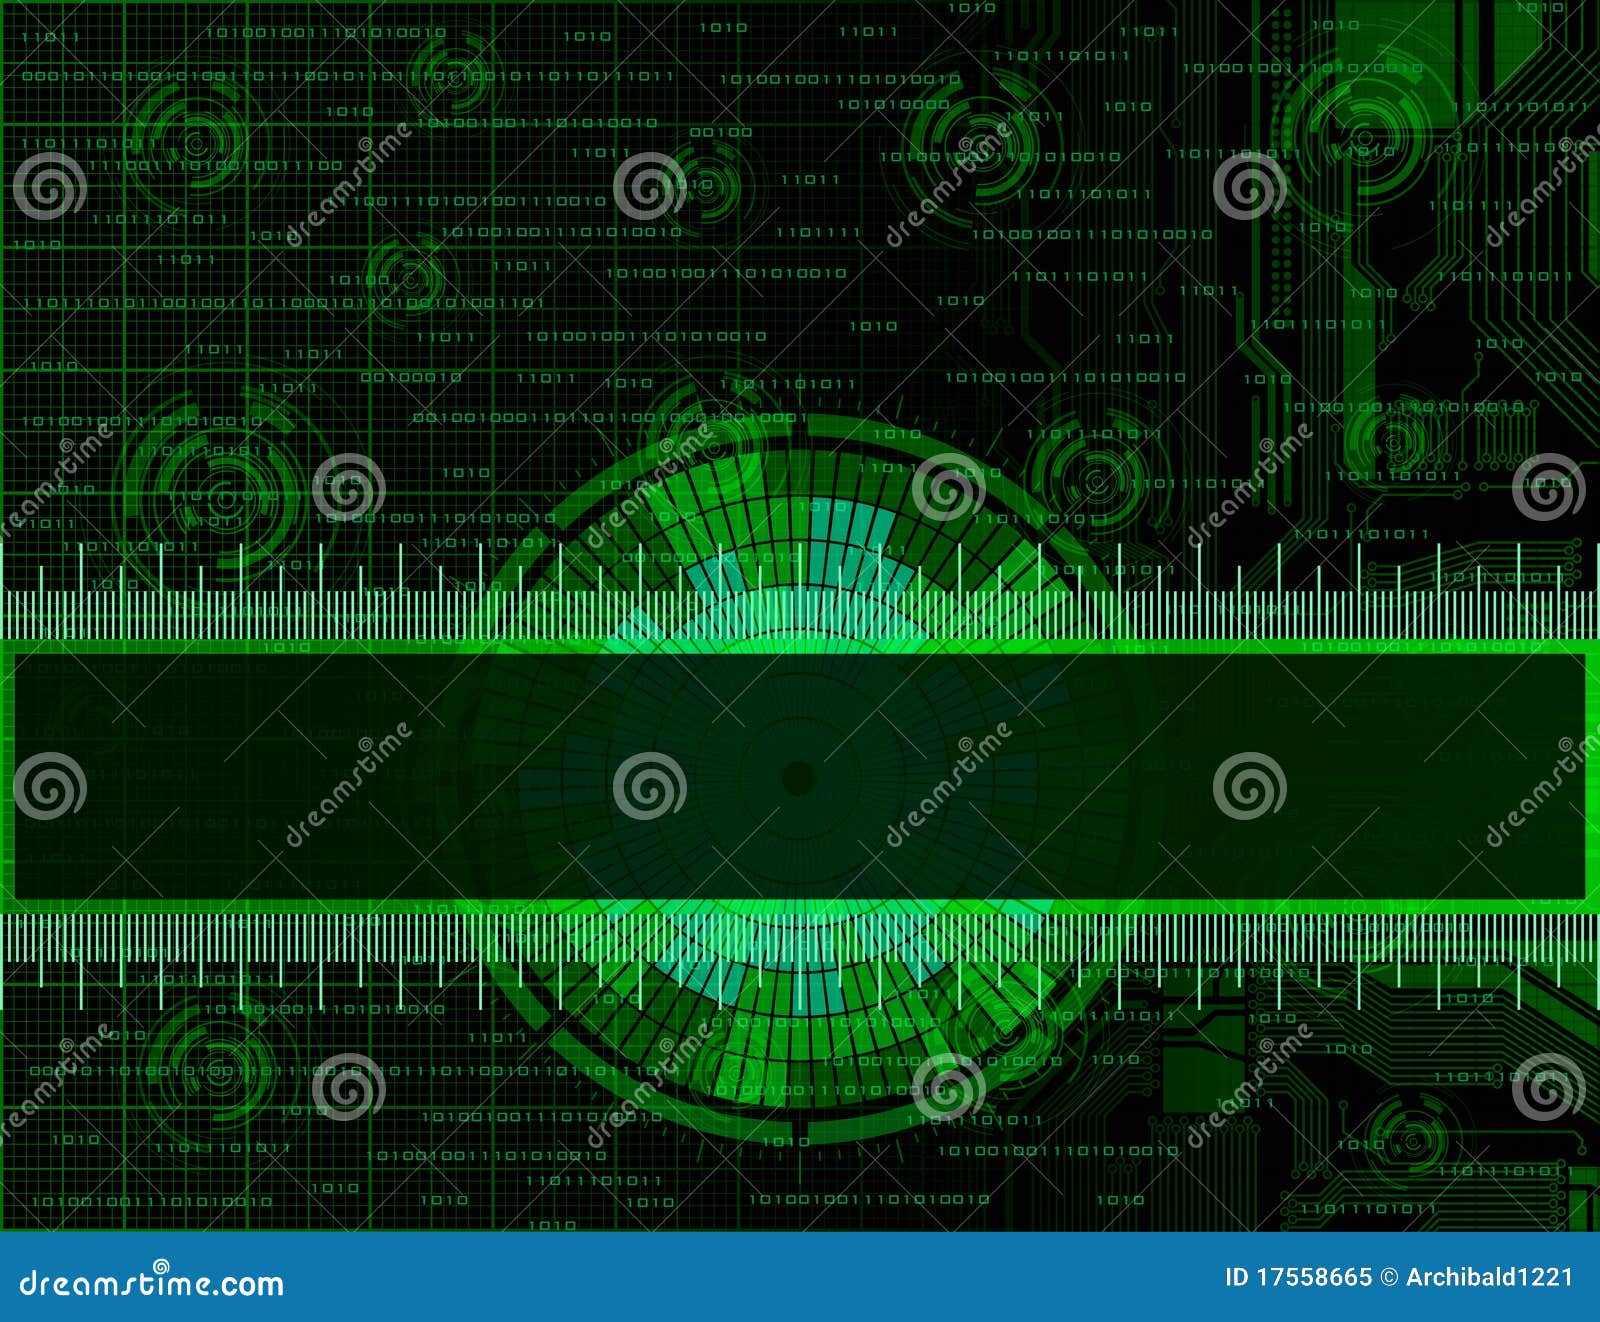 Vector background stock vector. Illustration of device - 17558665